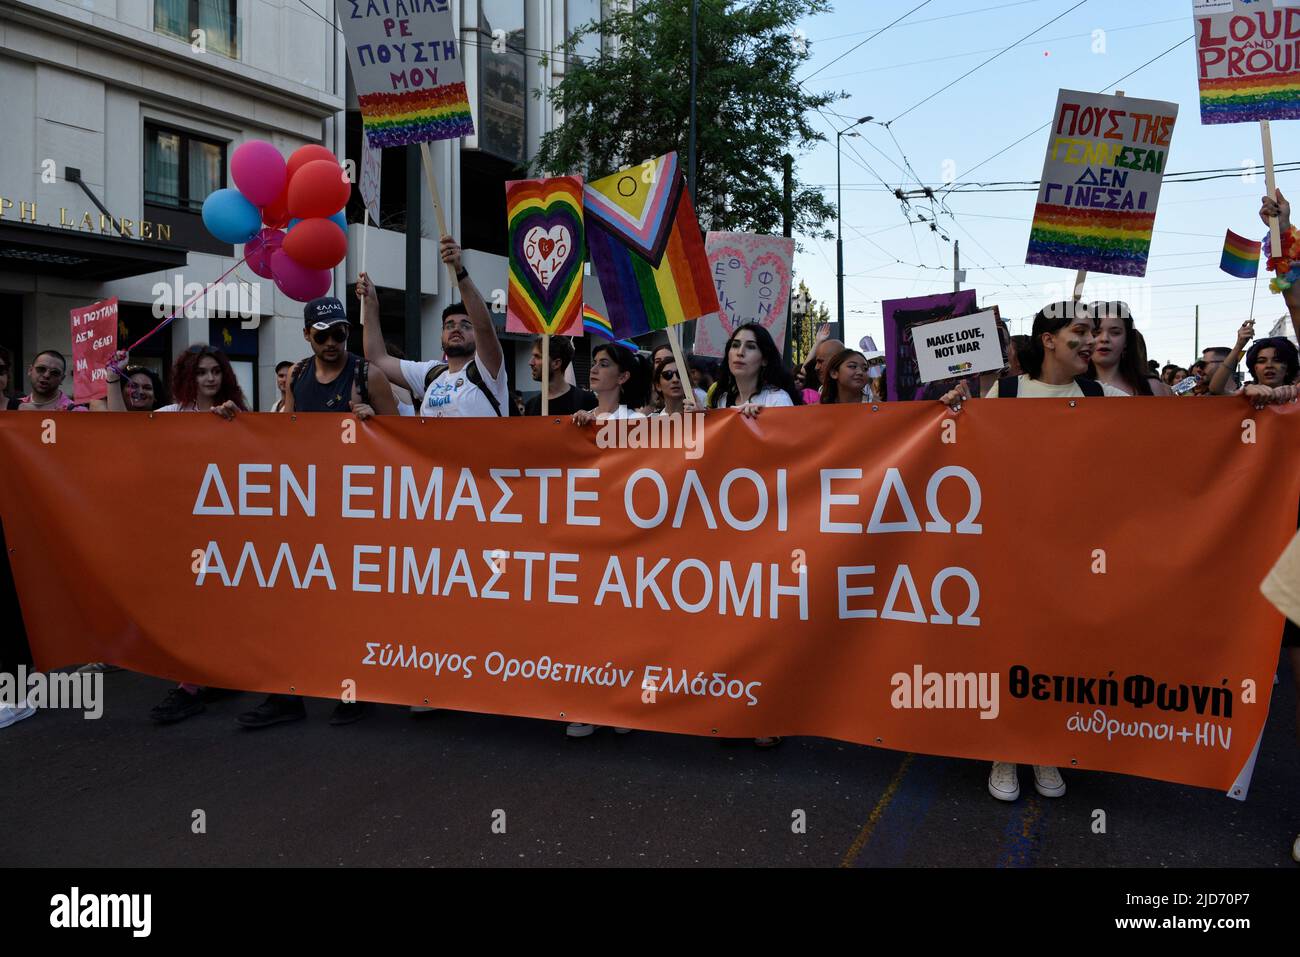 Athens, Greece. 18th June, 2022. People march waving rainbow flags and holding placards, during the Athens Pride anual parade. Thousands demonstrated during the Athens Pride 2022 parade to raise awareness, elevate the visibility of LGBTQ persons in Greek society and defend their rights against sexual discrimination. Credit: Nikolas Georgiou/Alamy Live News Stock Photo